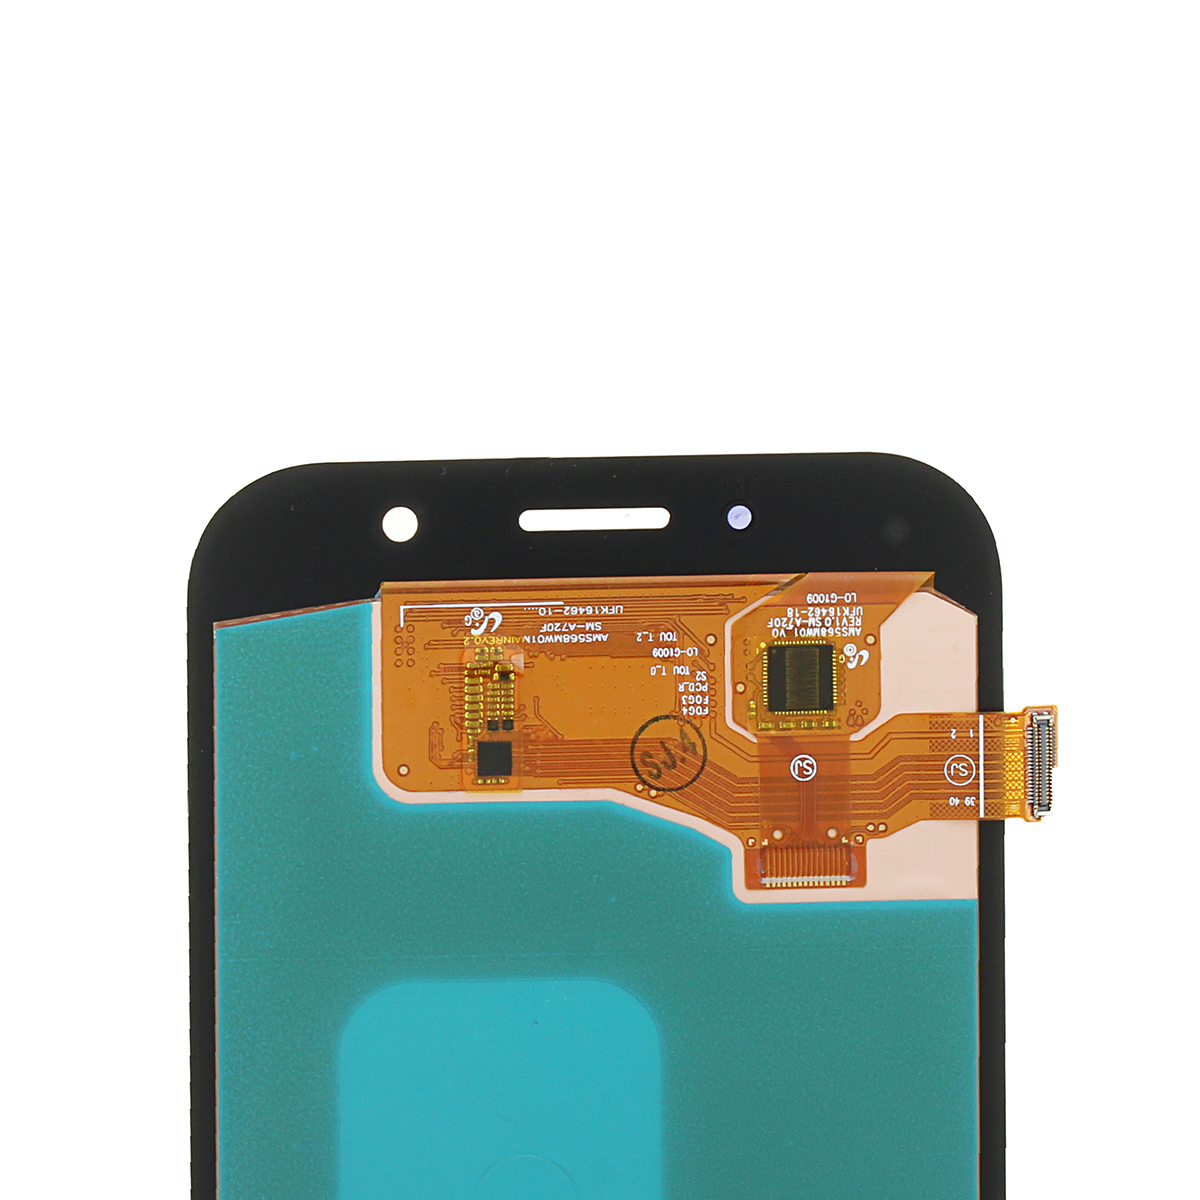 Full-Assembly-LCD-DisplayTouch-Screen-Digitizer-Replacement-amp-Repair-Tools-for-Samsung-Galaxy-A7-1275312